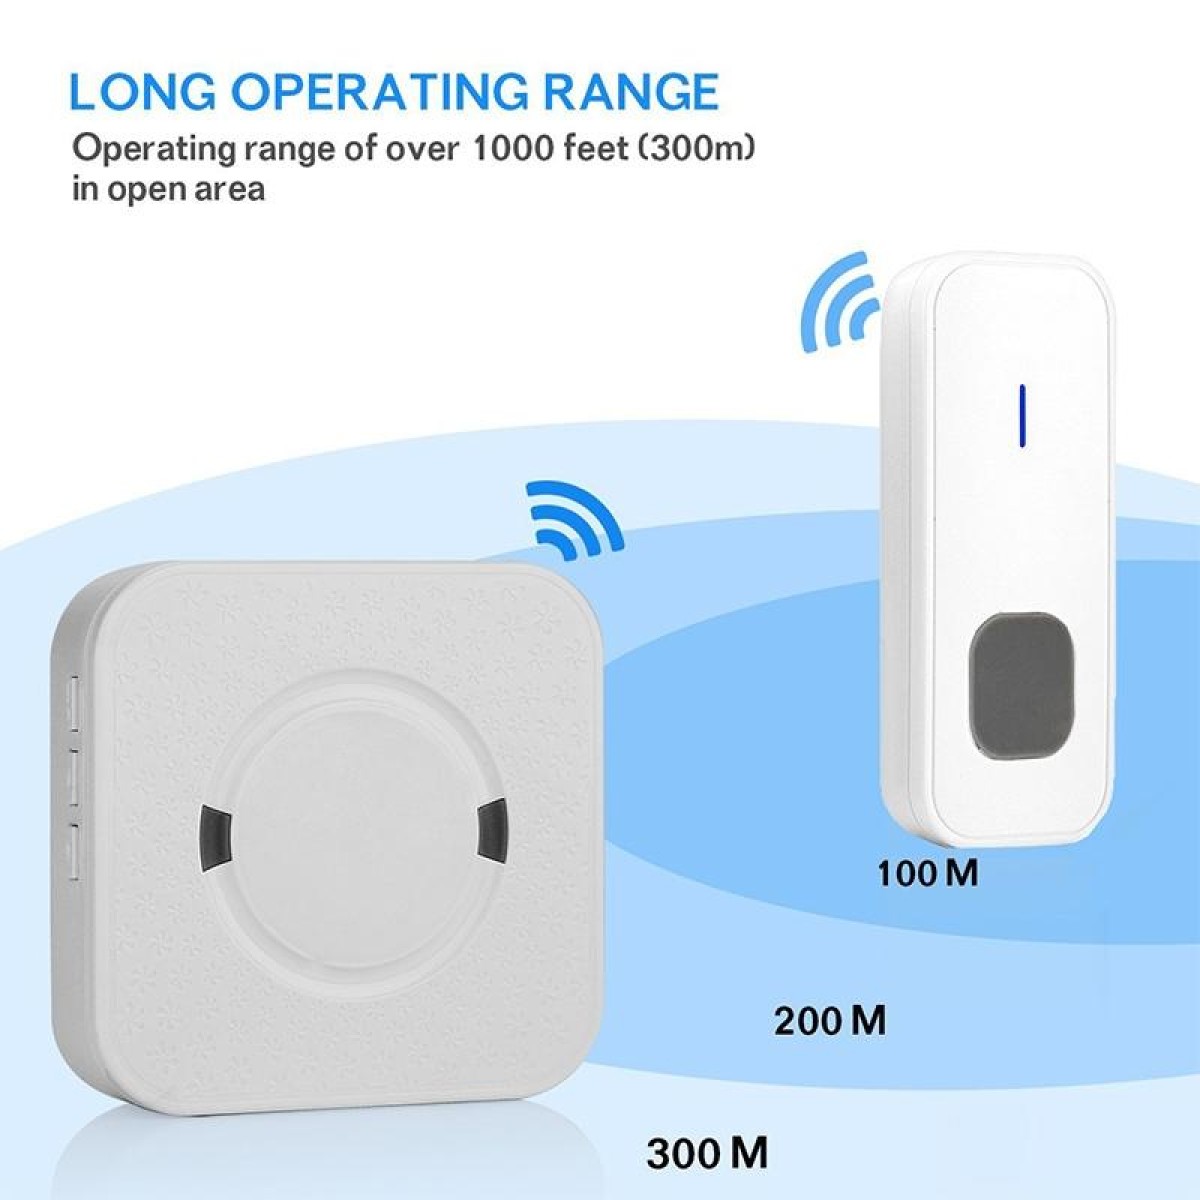 P6 110dB Wireless IP55 Waterproof Low Power Consumption WiFi Doing-dong Doorbell Receiver, Receiver Distance: 300m, UK Plug(White)